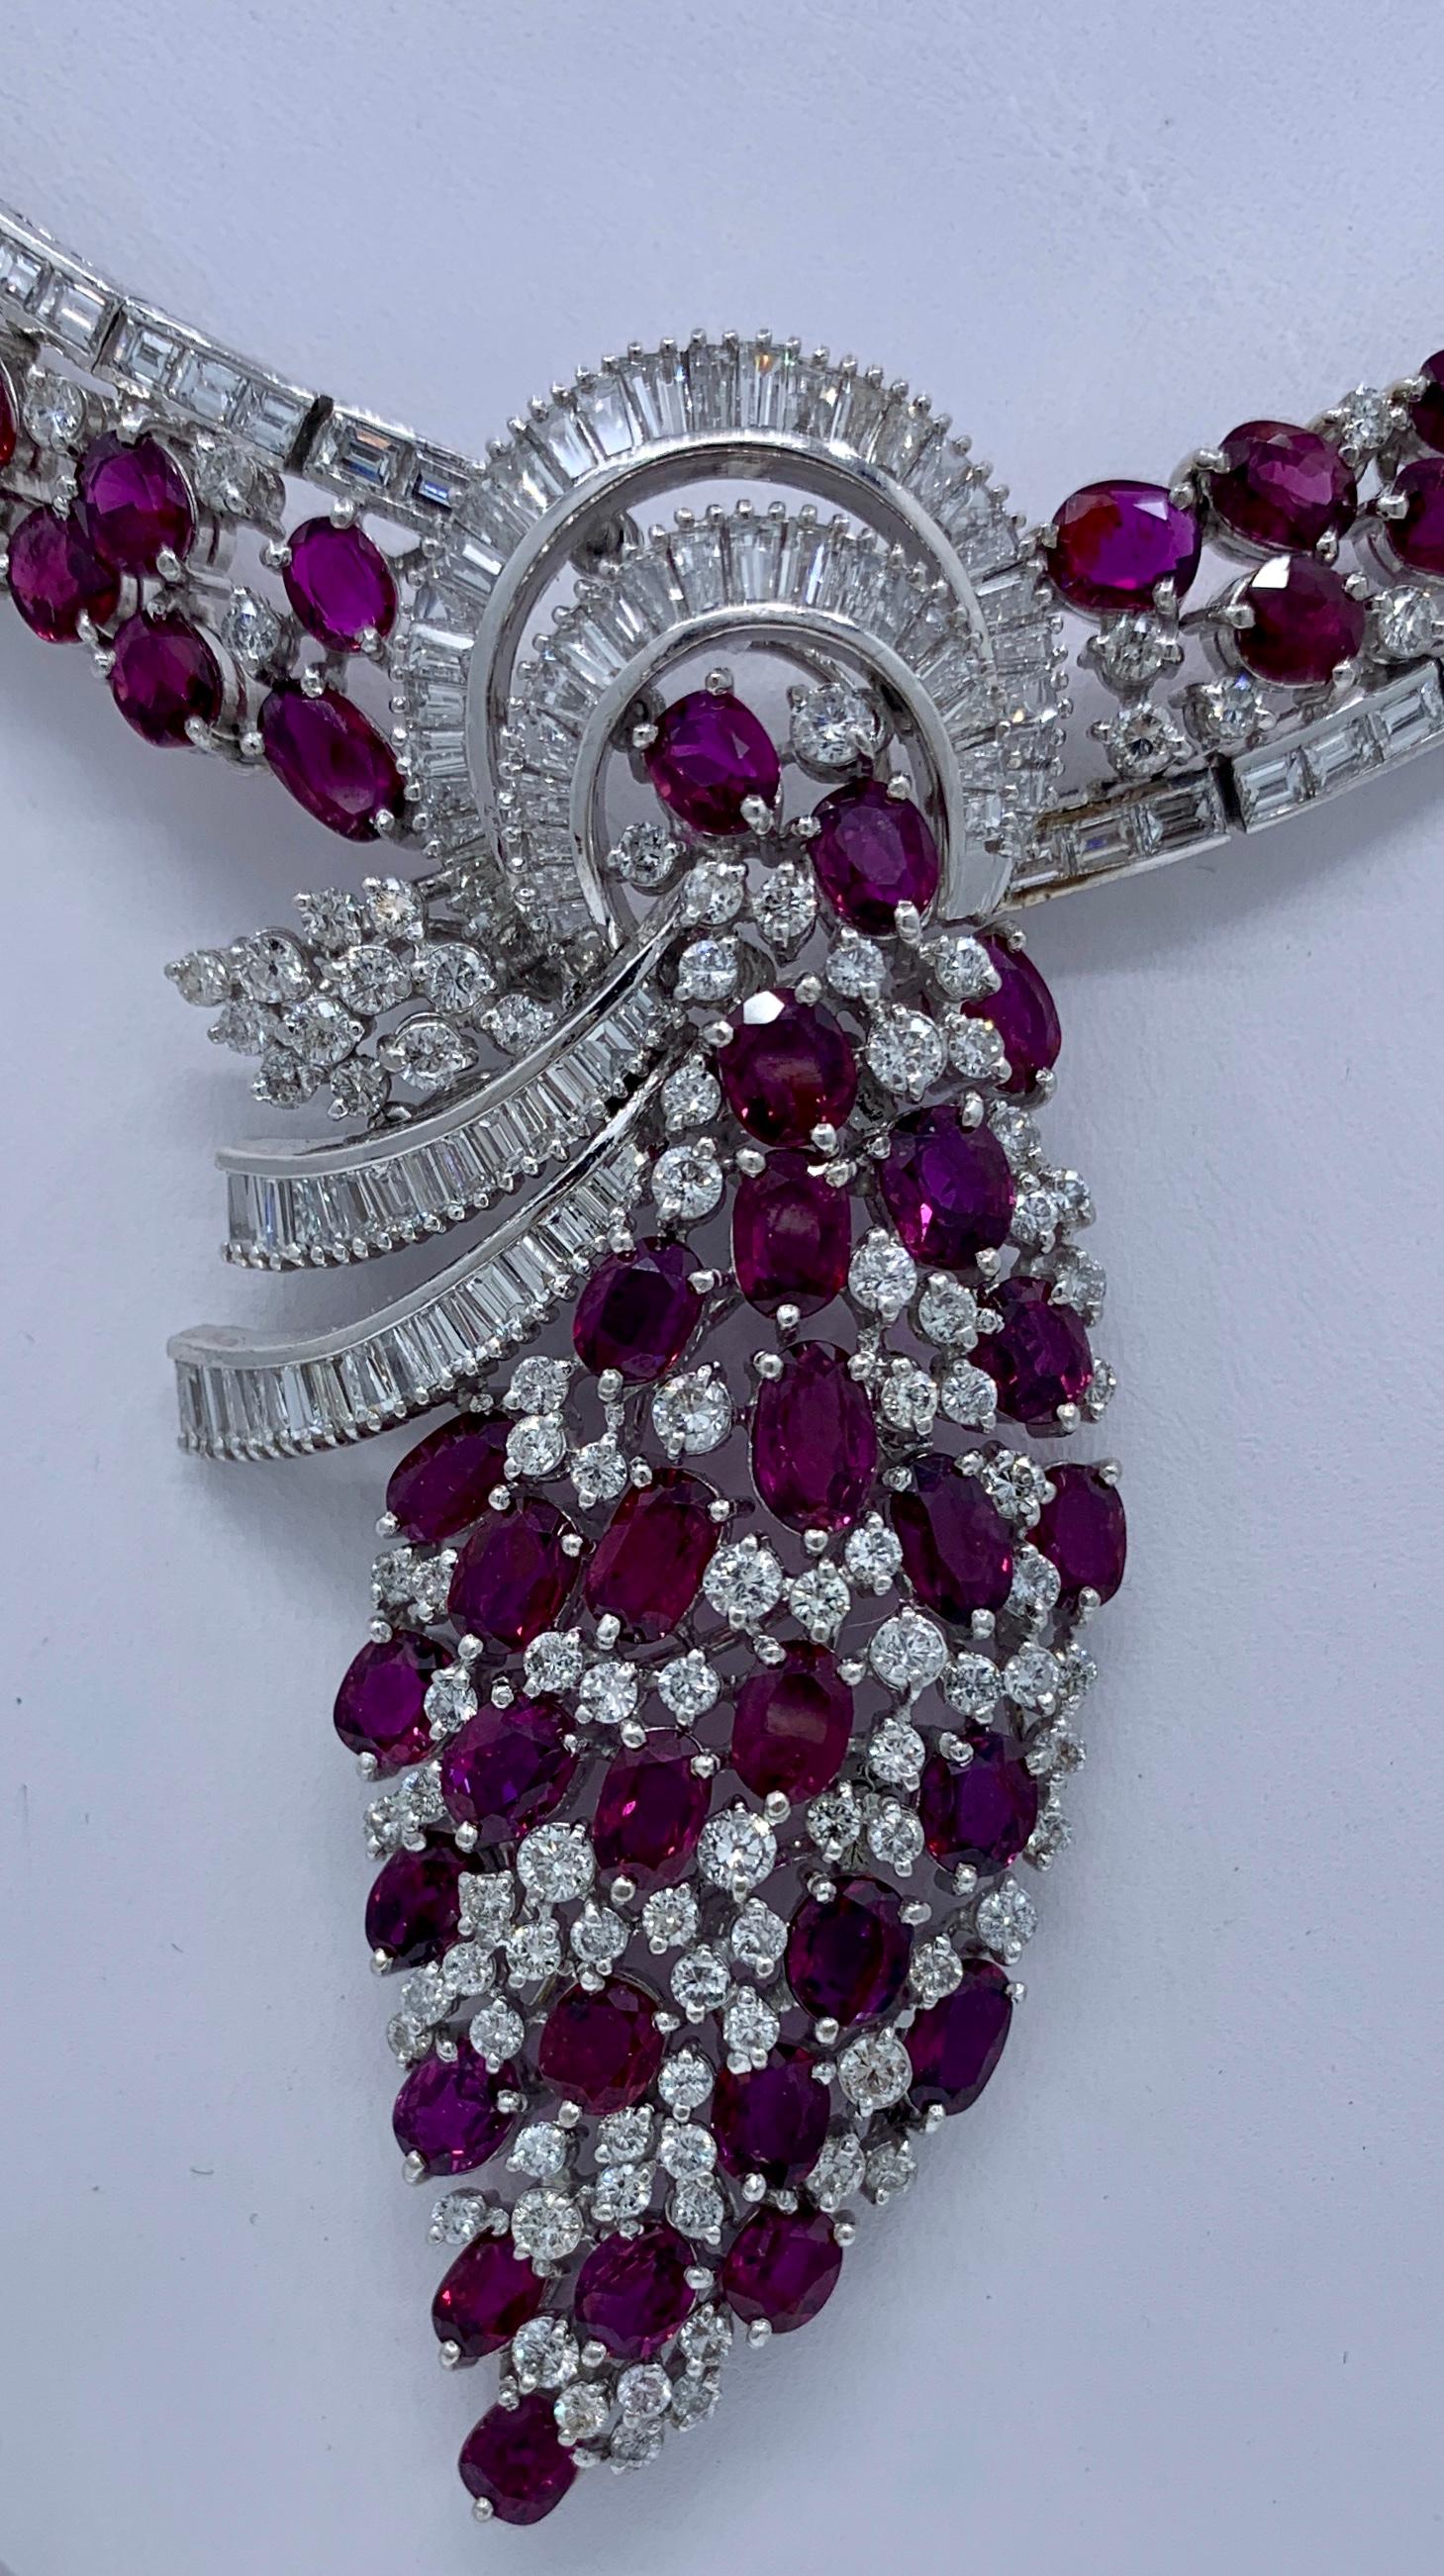 Magnificent necklace, fit for a queen, is a 70.2 total carat weight GIA Certified (Report No. 1206652363) natural (no heat treatment) corundum ruby and diamond, white gold, choker length drop necklace.  Necklace consists of a white gold, ruby and